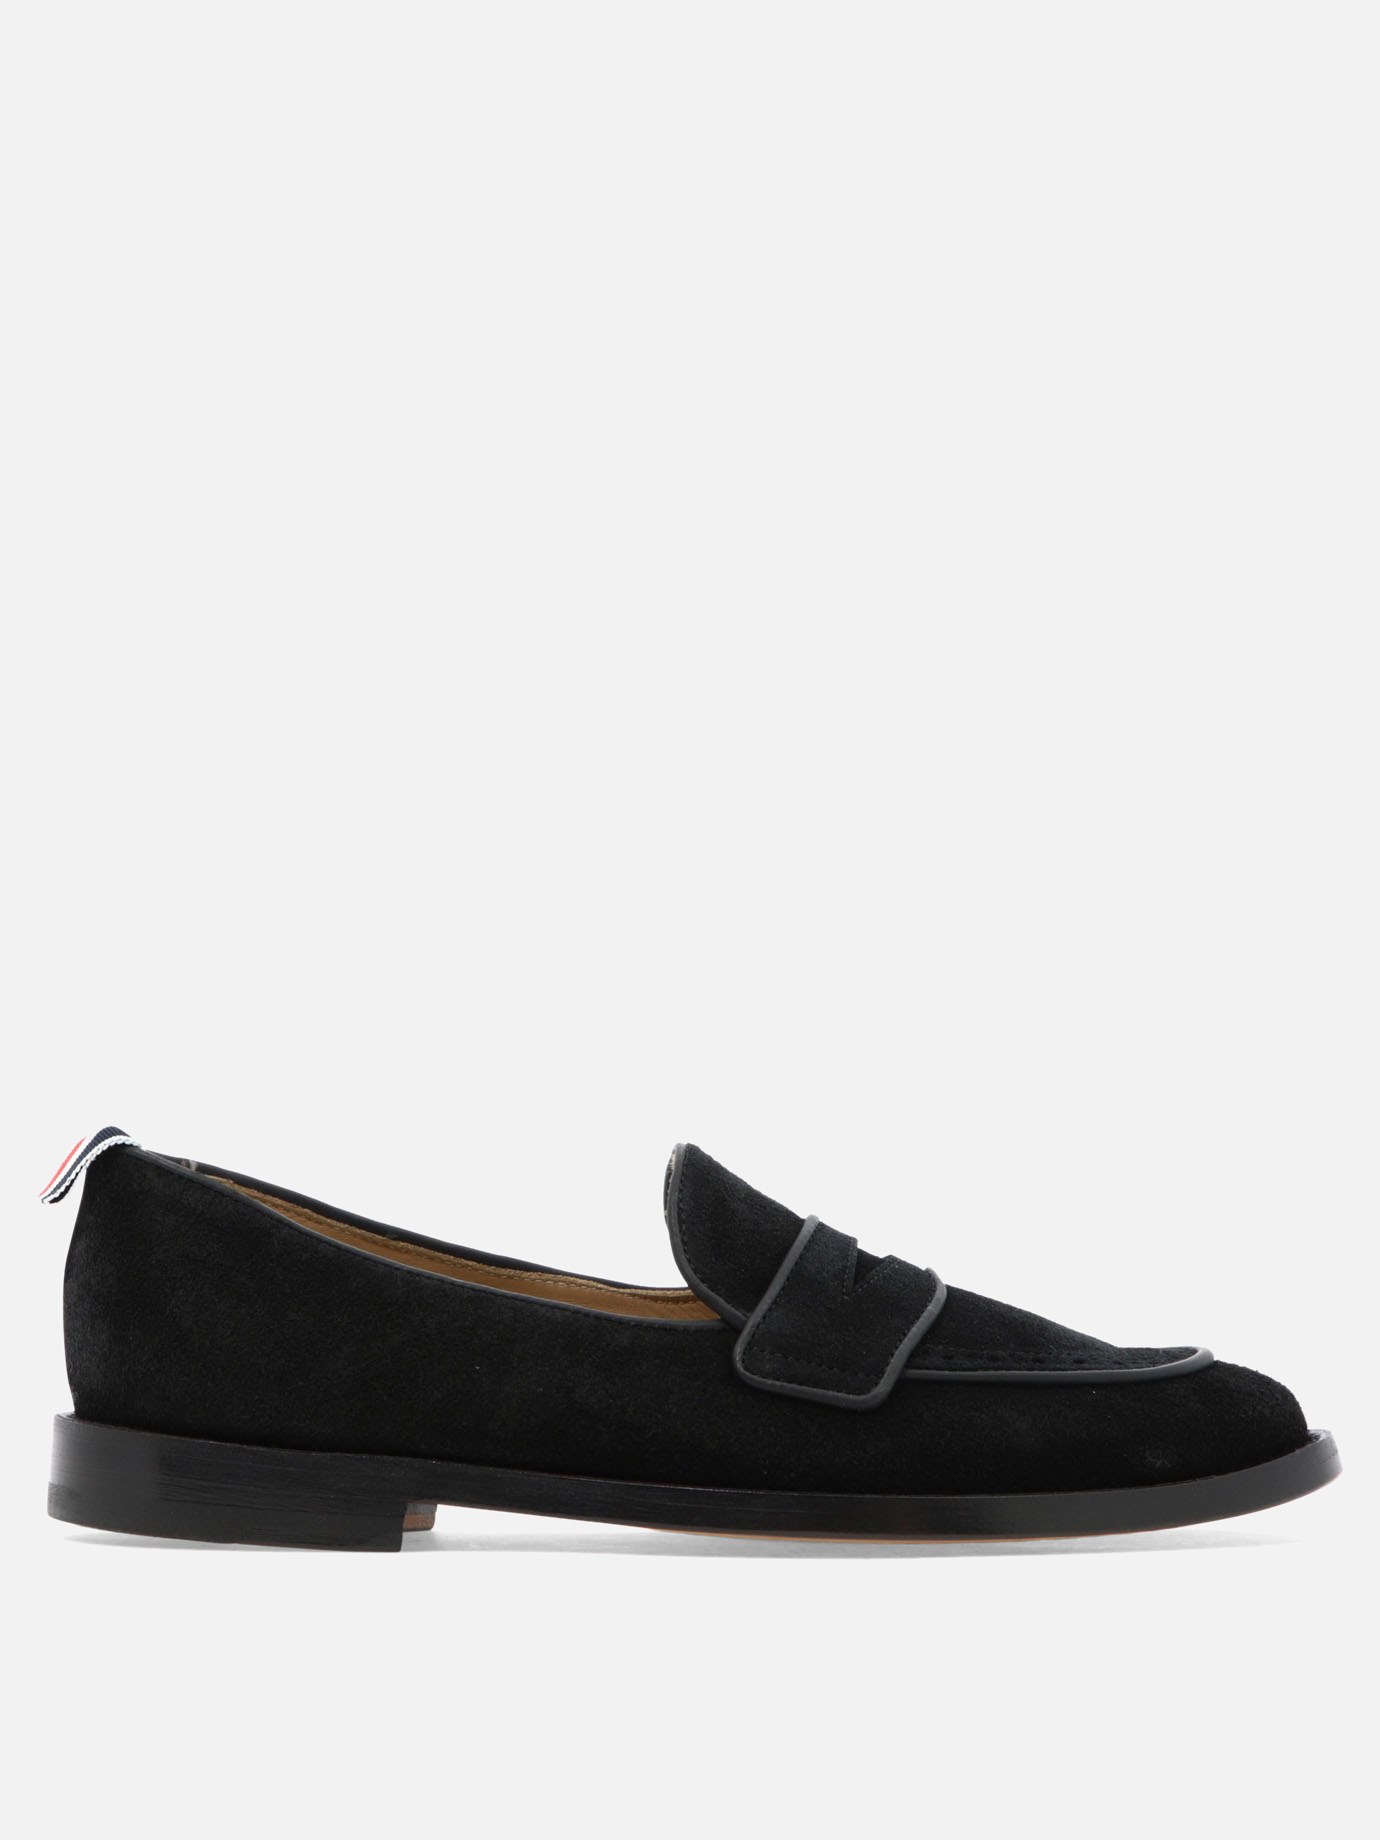  Varsity Penny  loafersby Thom Browne - 0